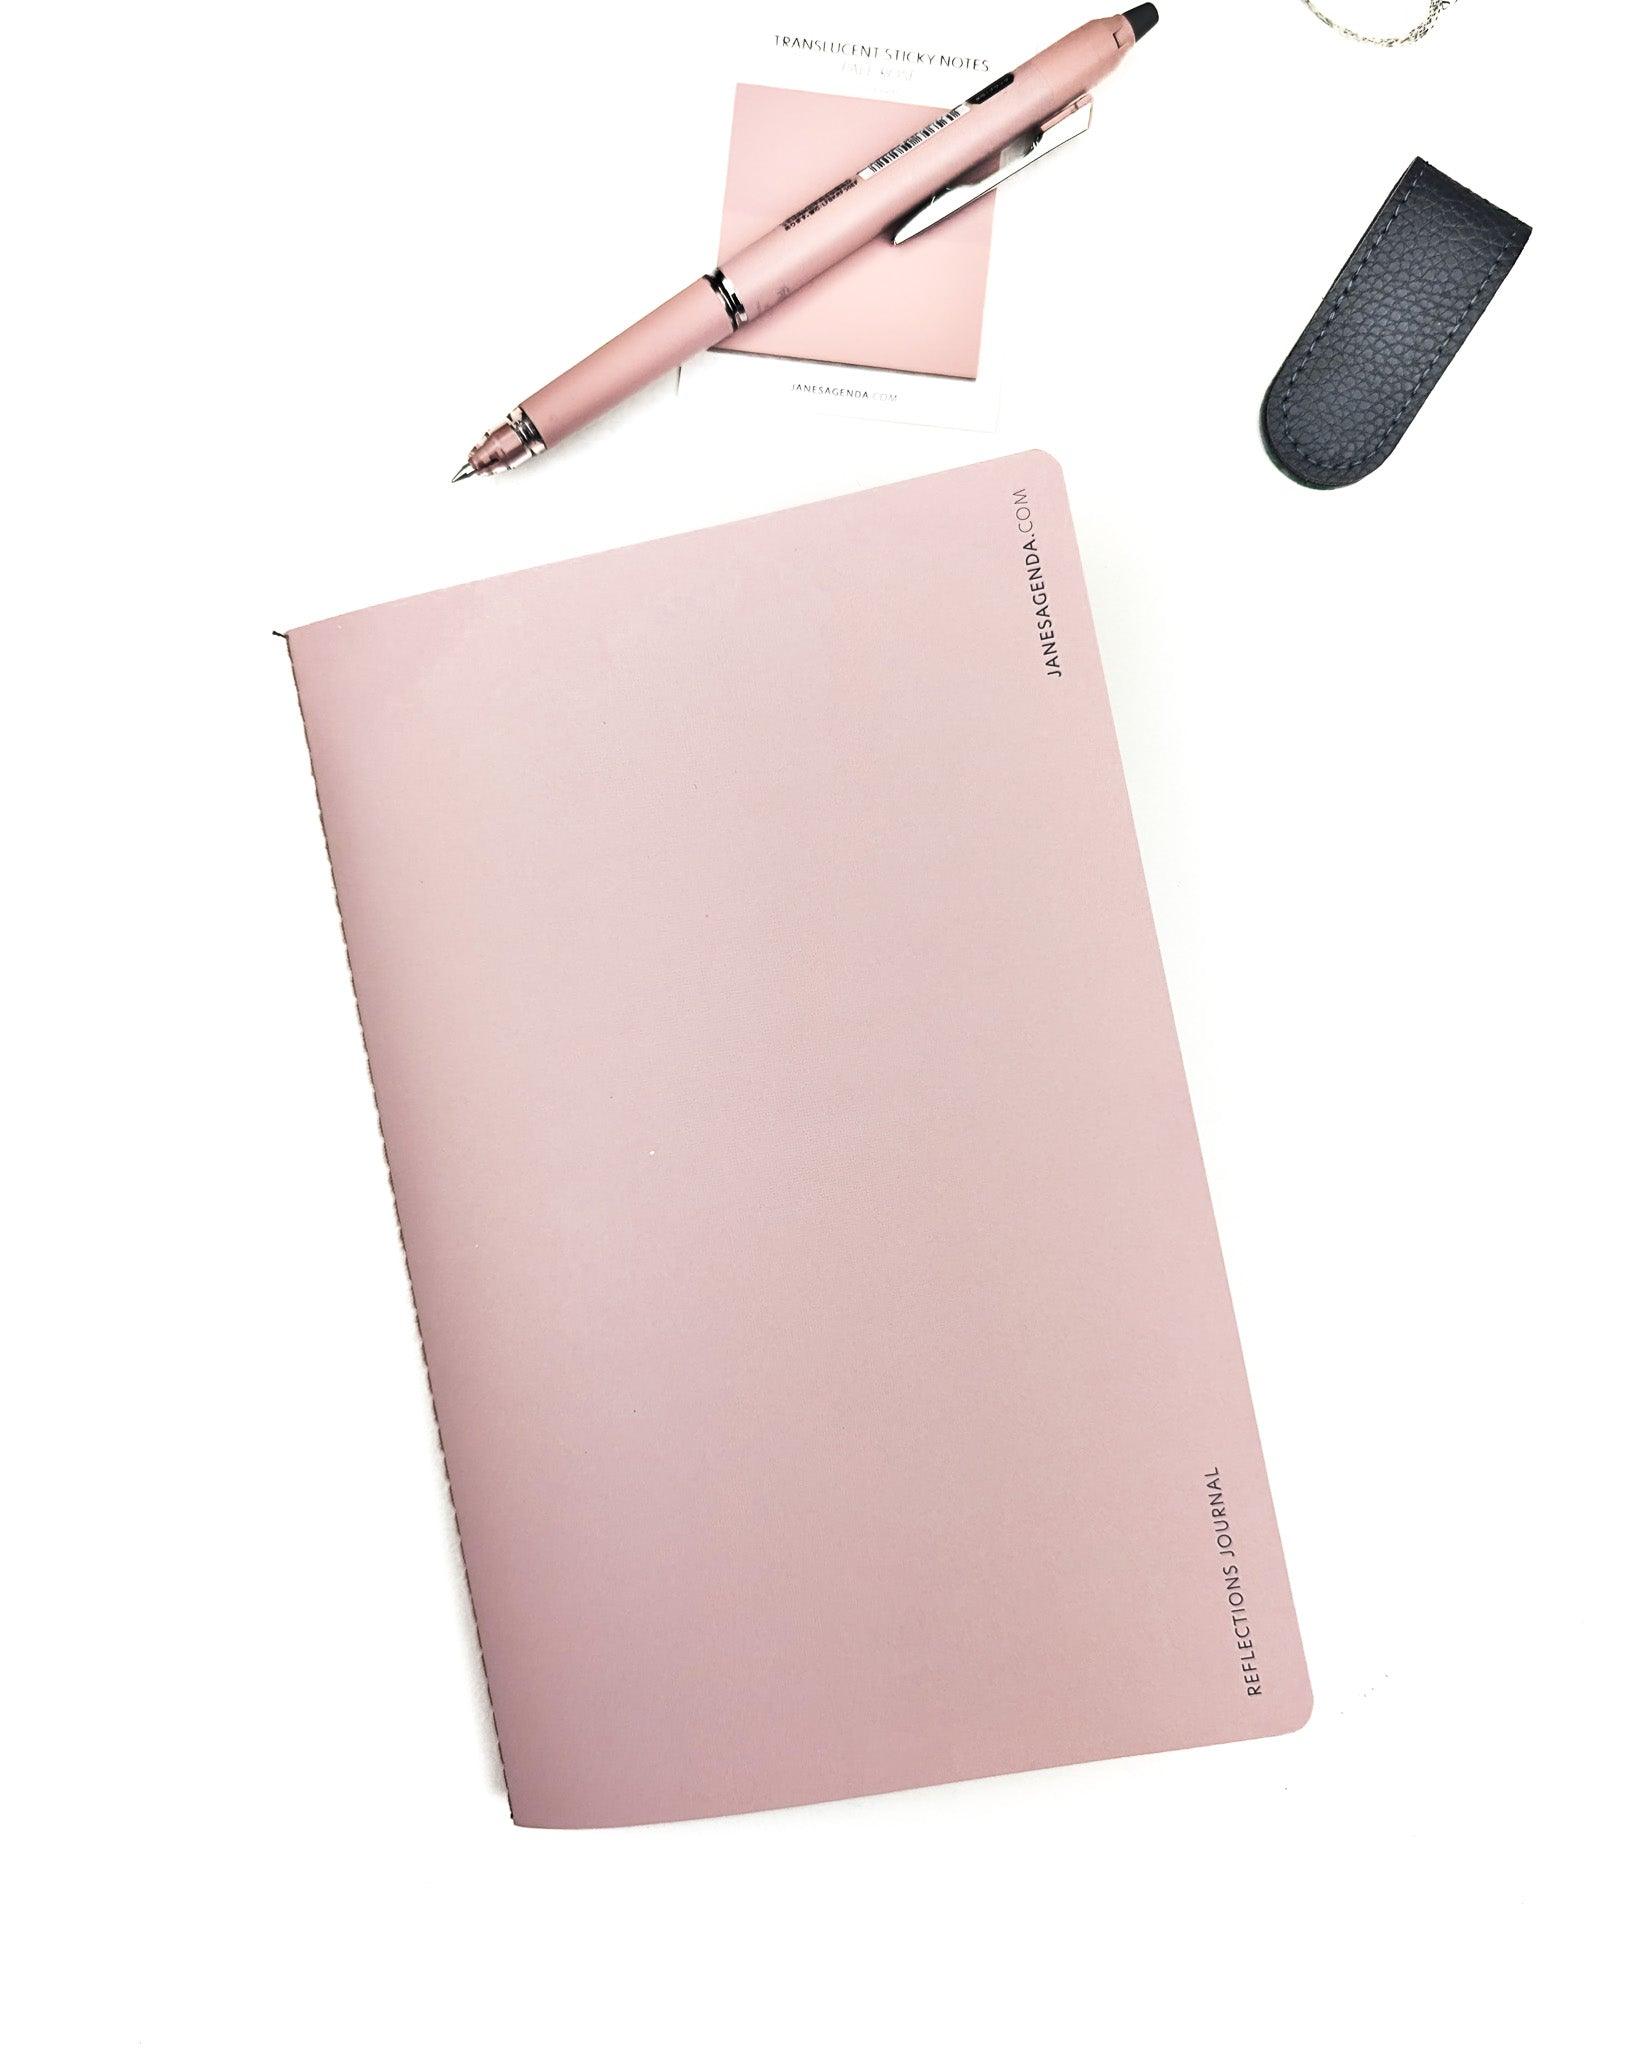 Saddle stitched notebook reflections journal by Jane's Agenda in soft pink.